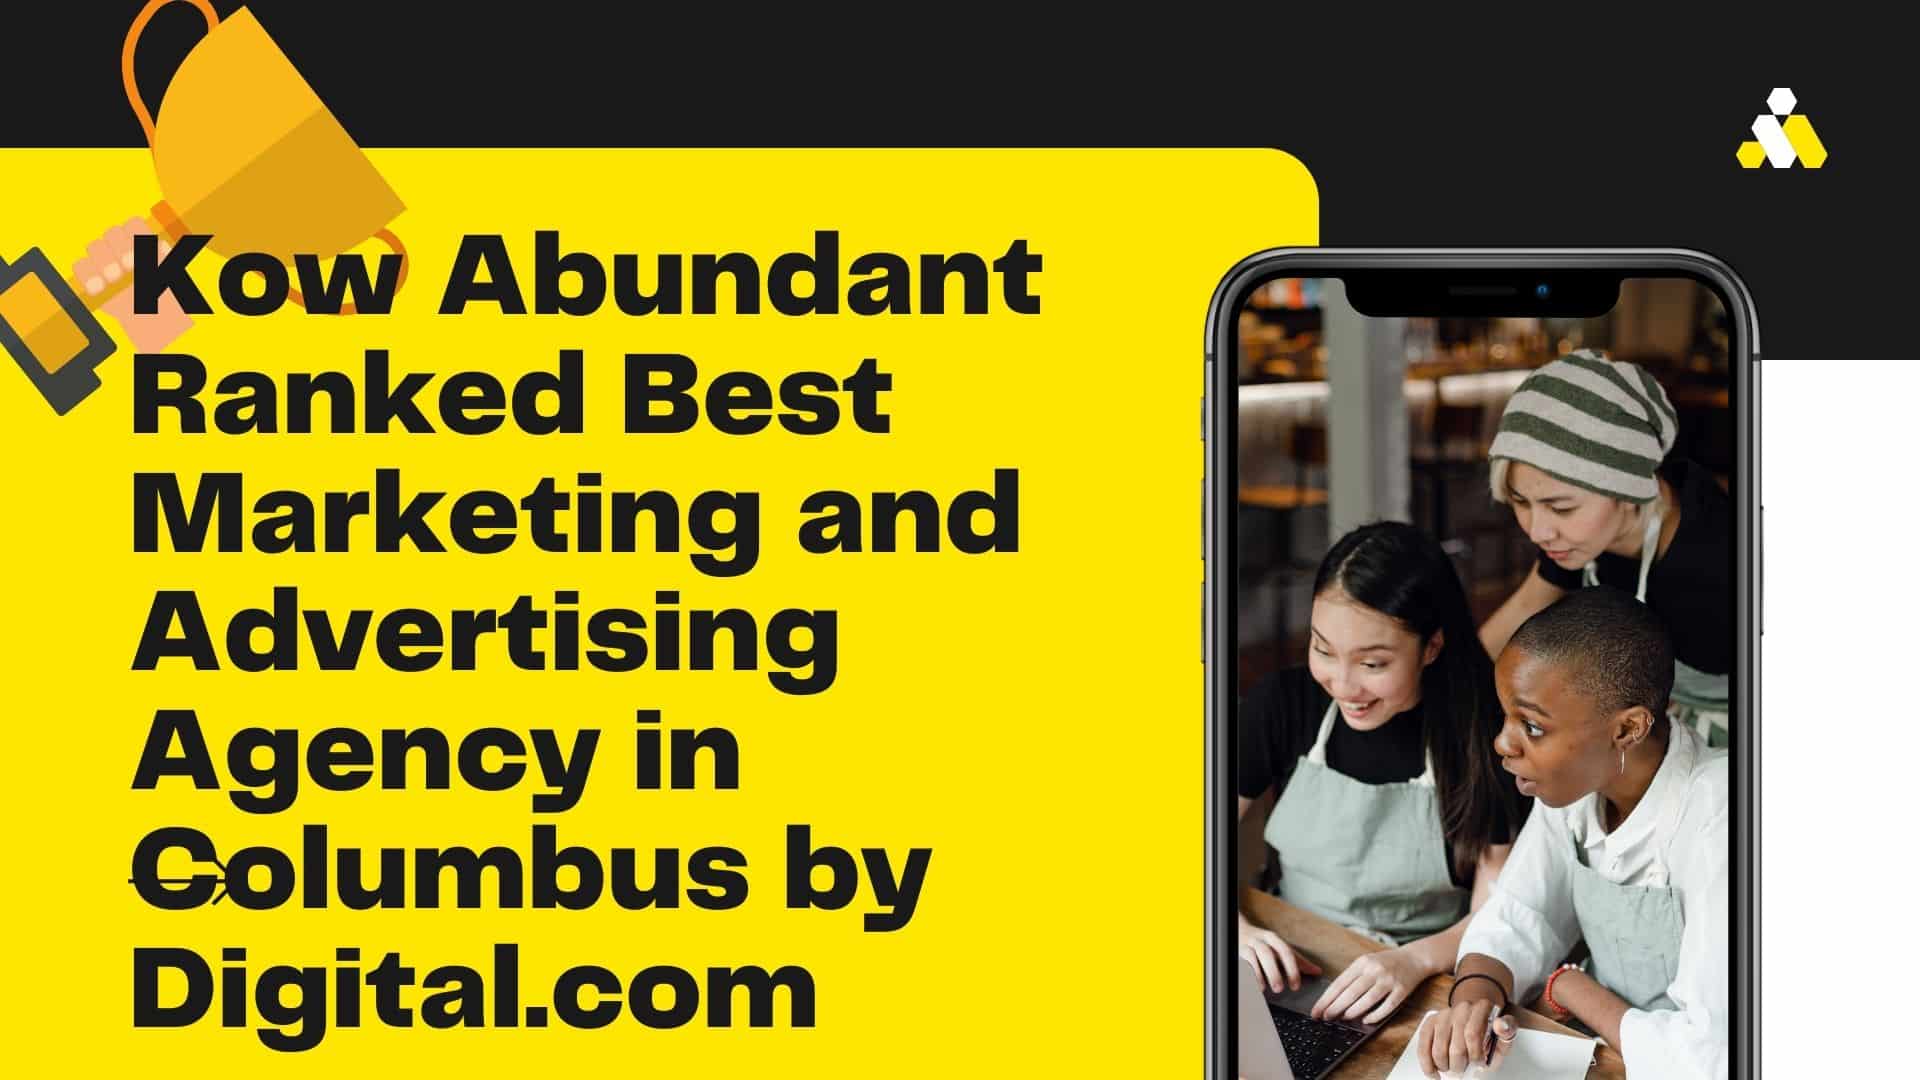 Kow Abundant ranked best Marketing and Advertising agency in Columbus by Digital.com